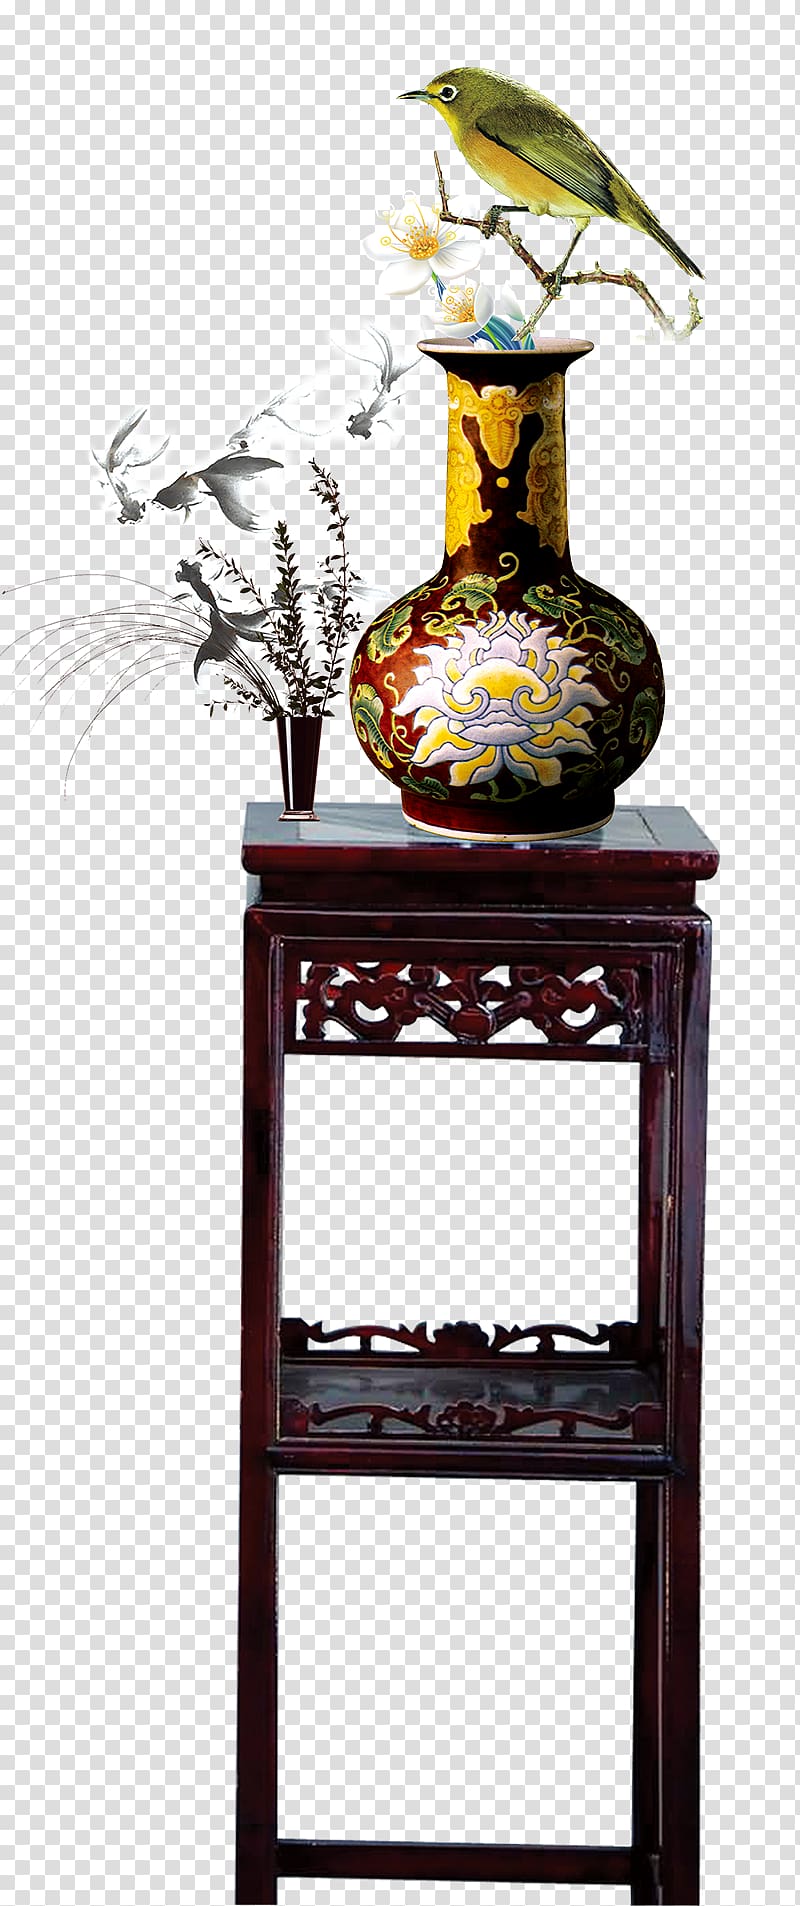 multicolored vase and green bird table decor illustration, Blue and white pottery Vase Icon, Chinese style wooden vase on the table transparent background PNG clipart